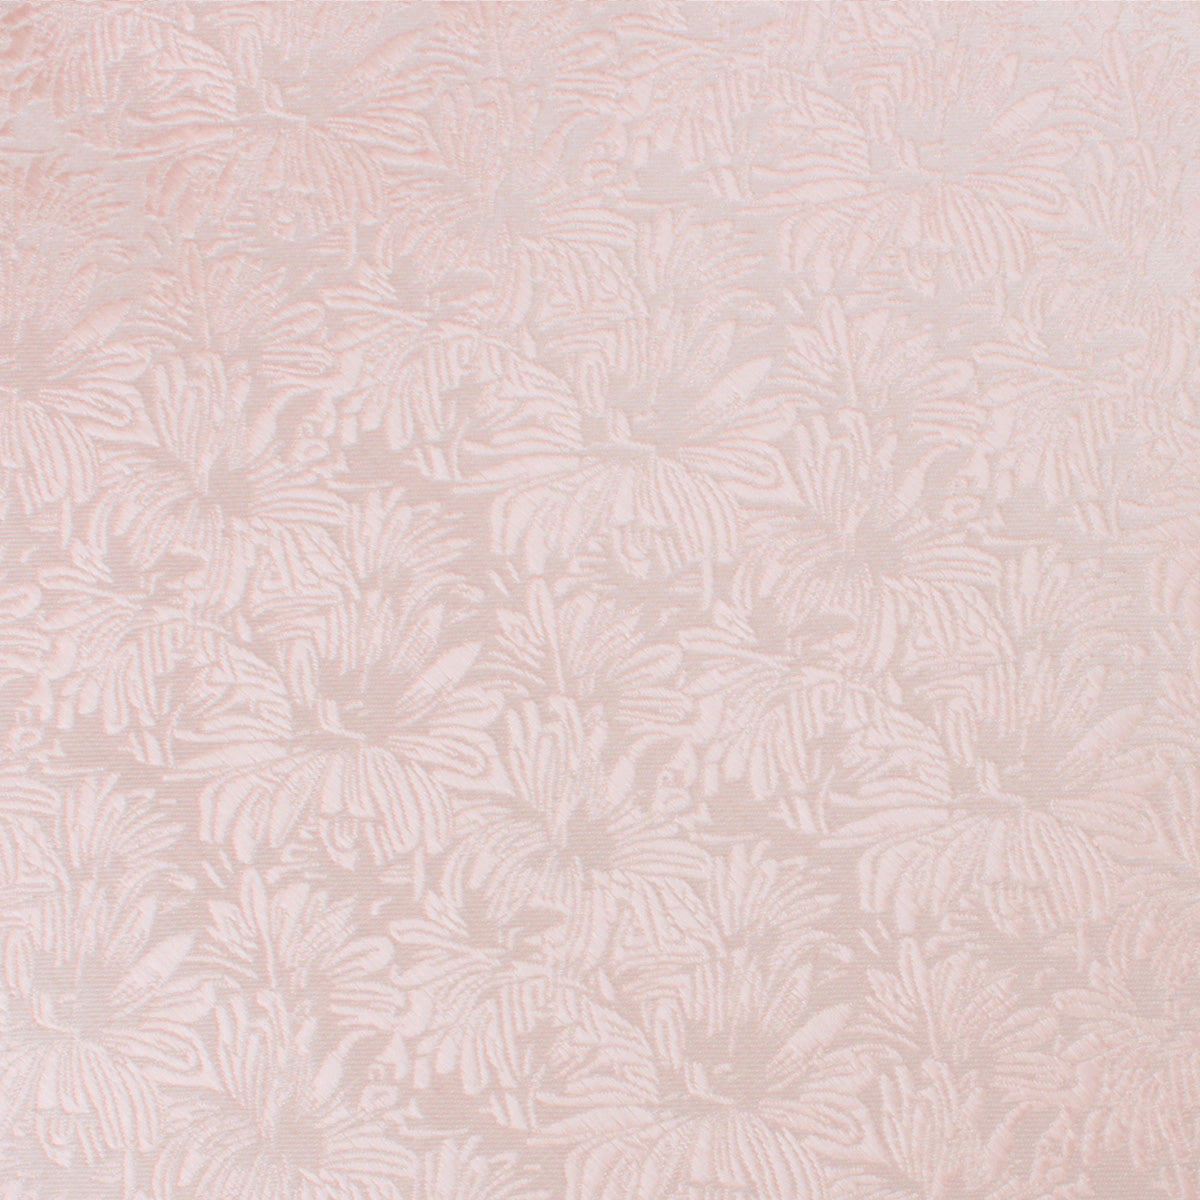 Blush Pink Daisy Flowers Floral Fabric Swatch